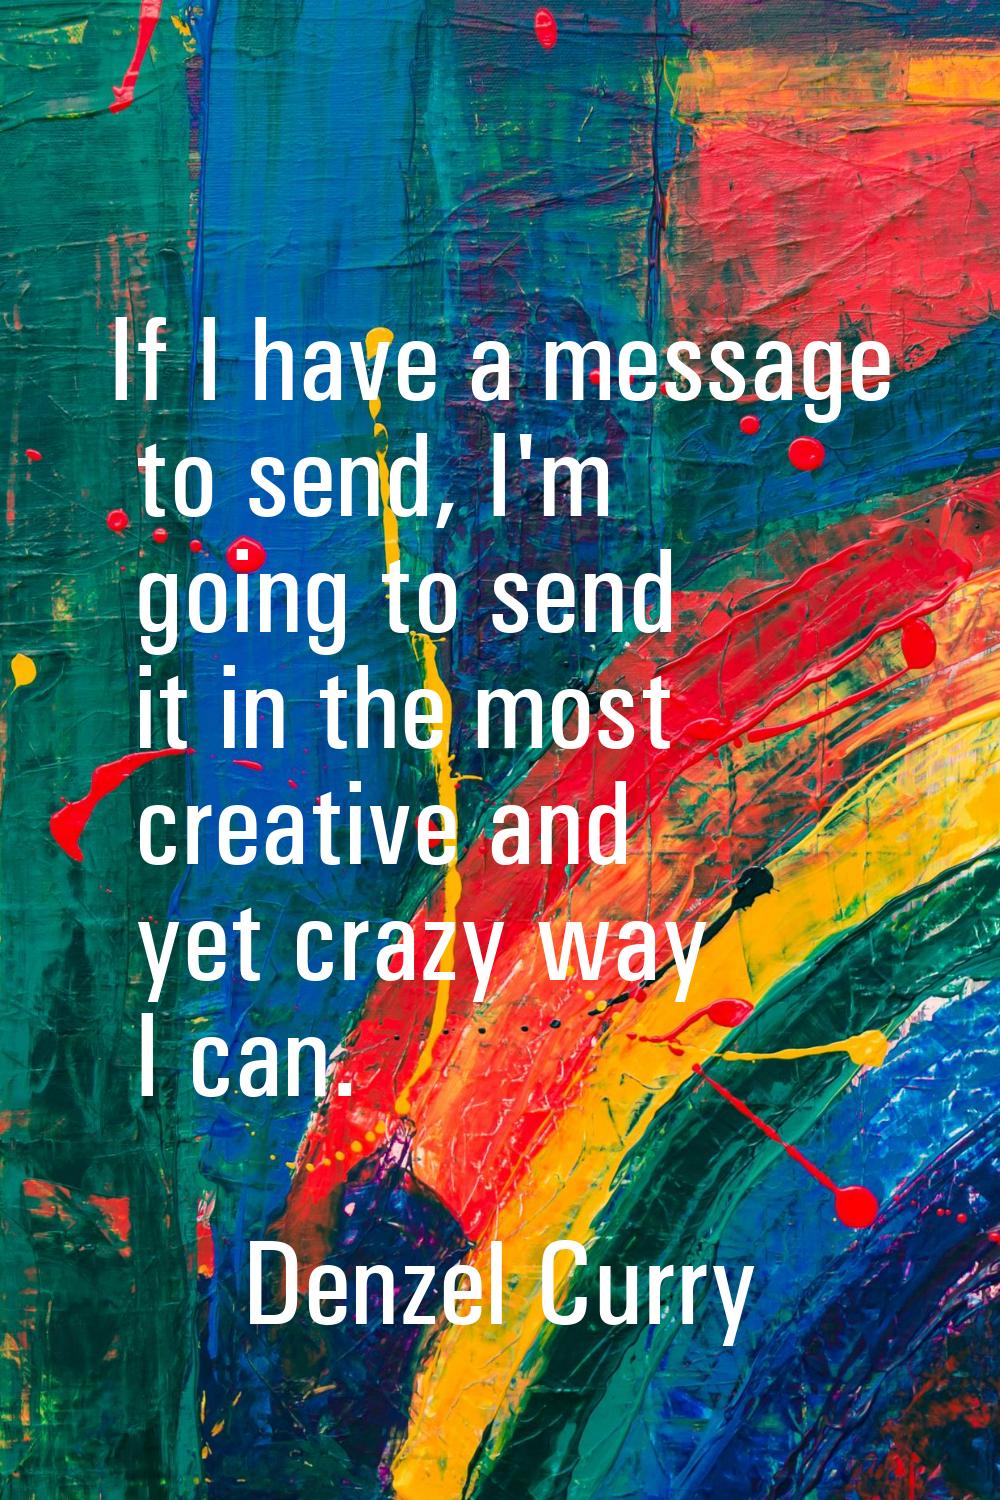 If I have a message to send, I'm going to send it in the most creative and yet crazy way I can.